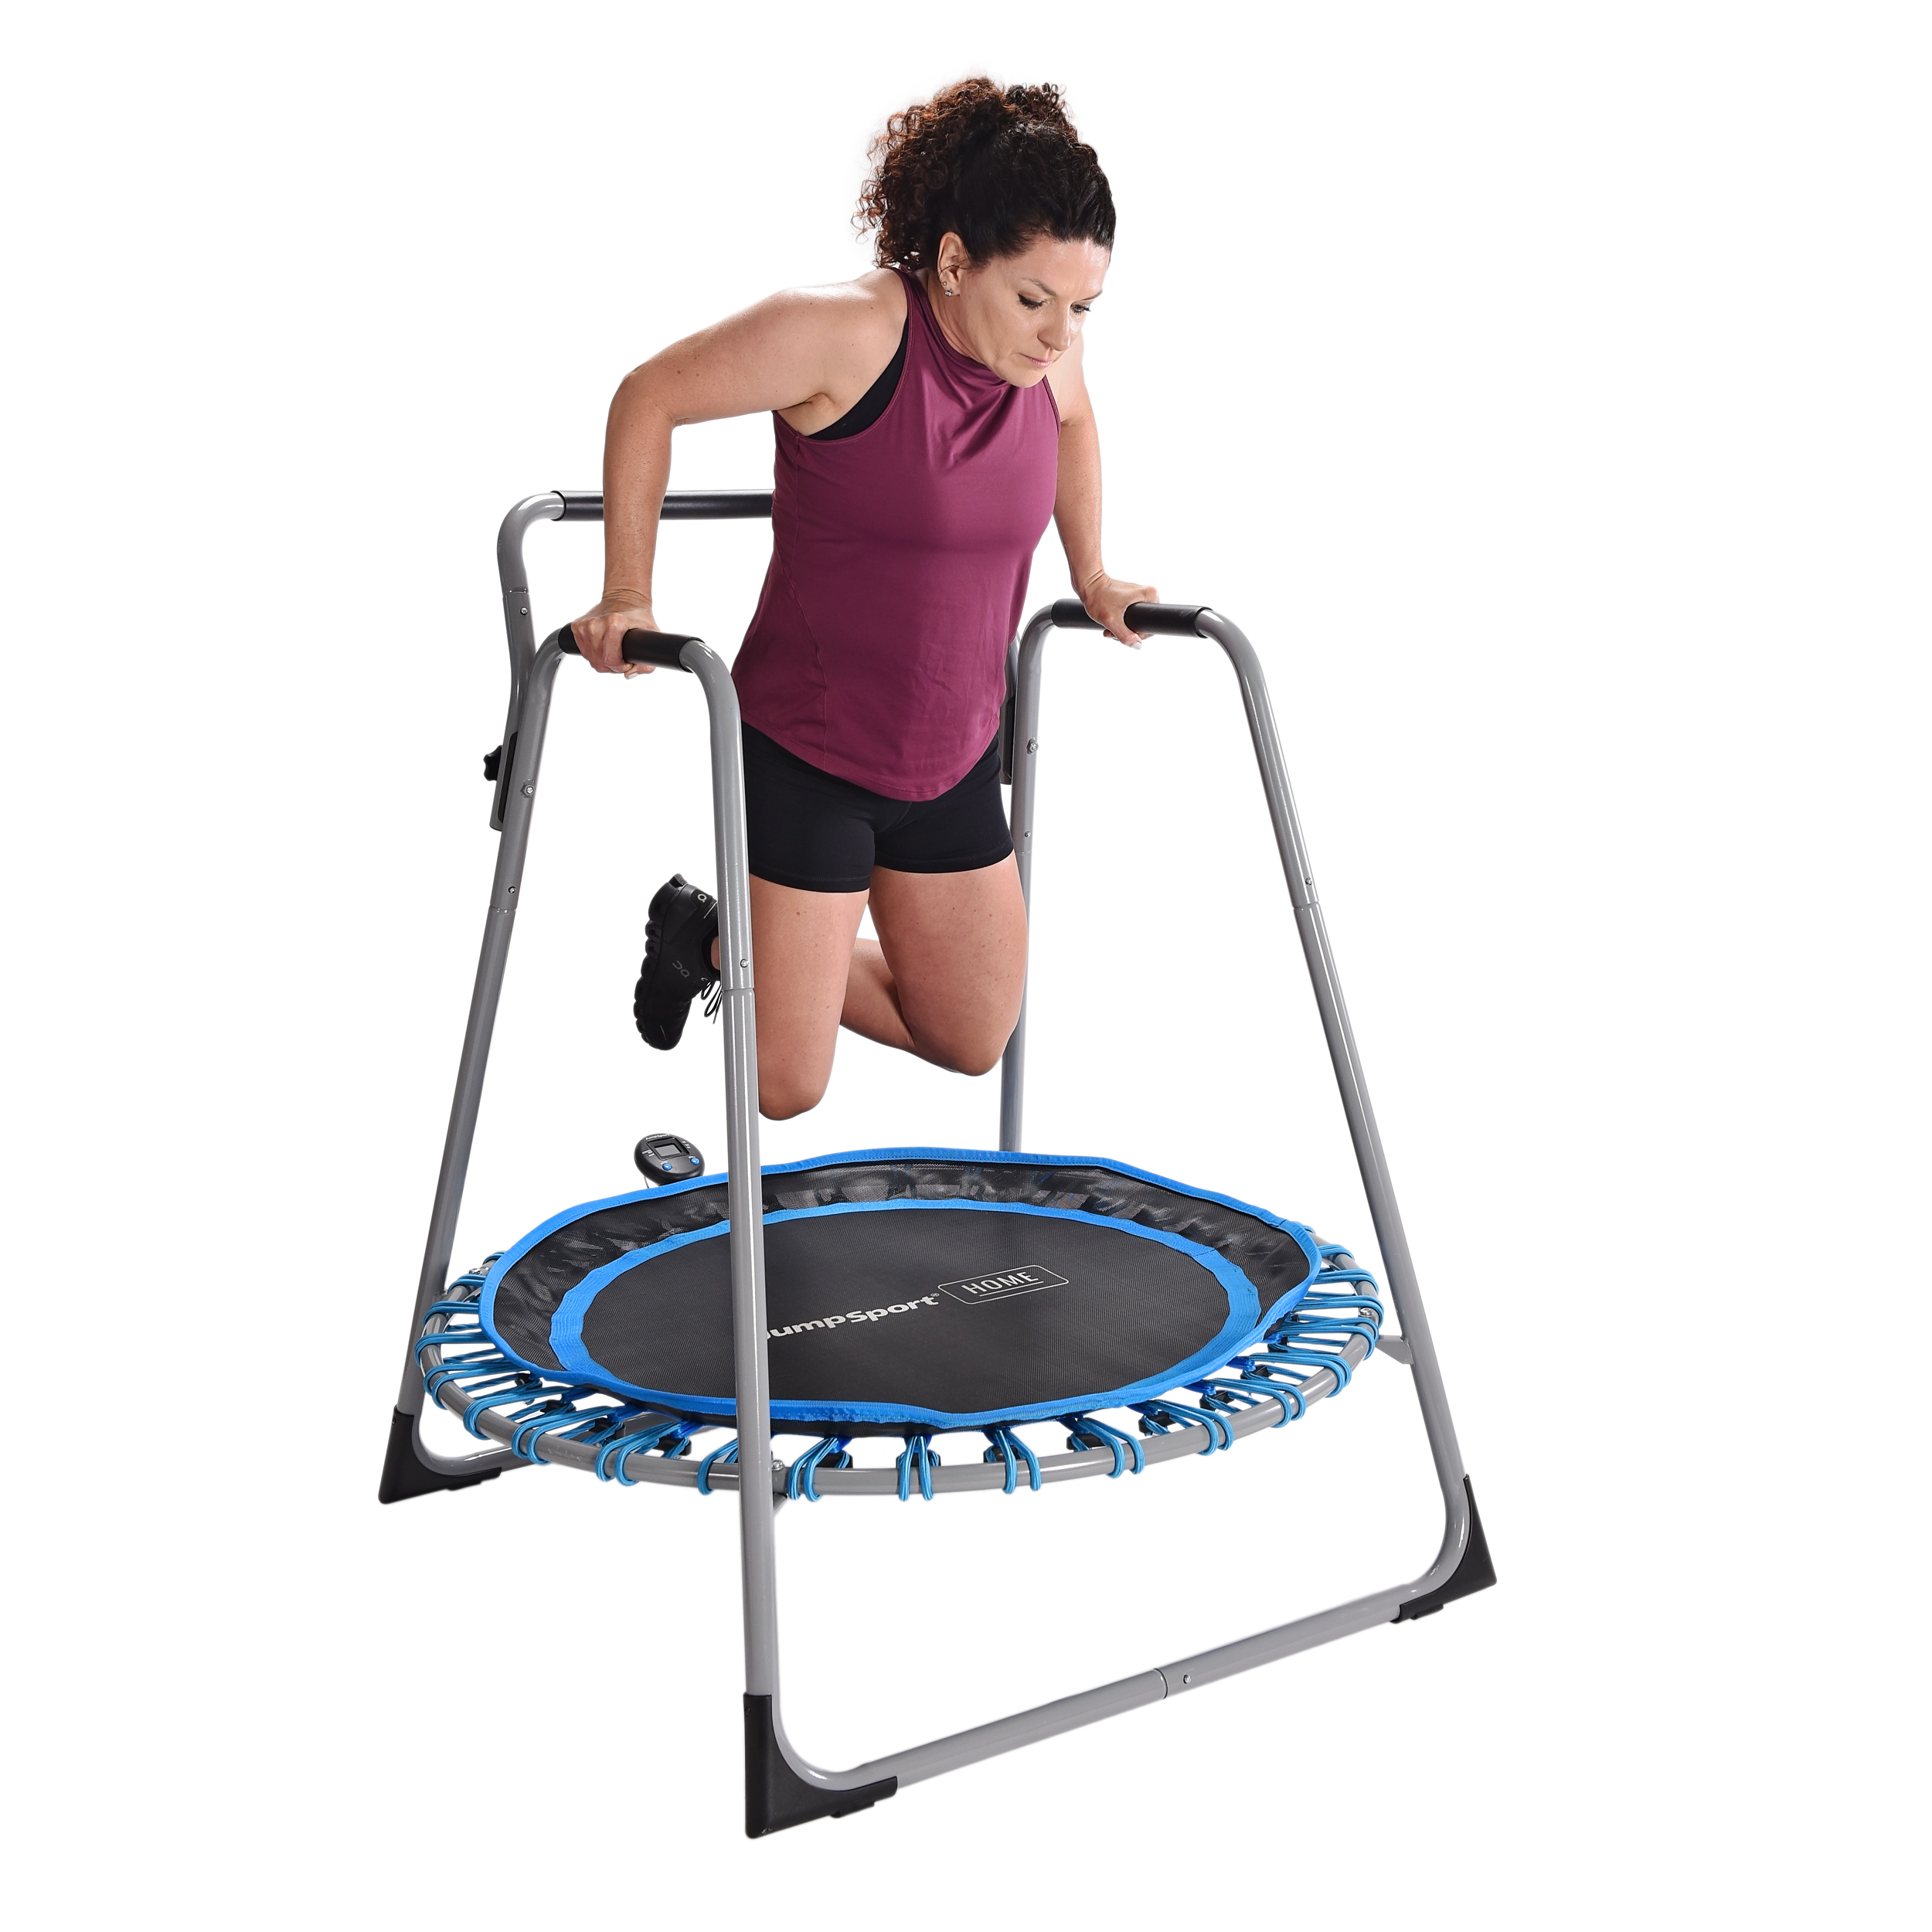 Lunch richting Krijt JumpSport Home 125 Fitness Trampoline - Stamina Products